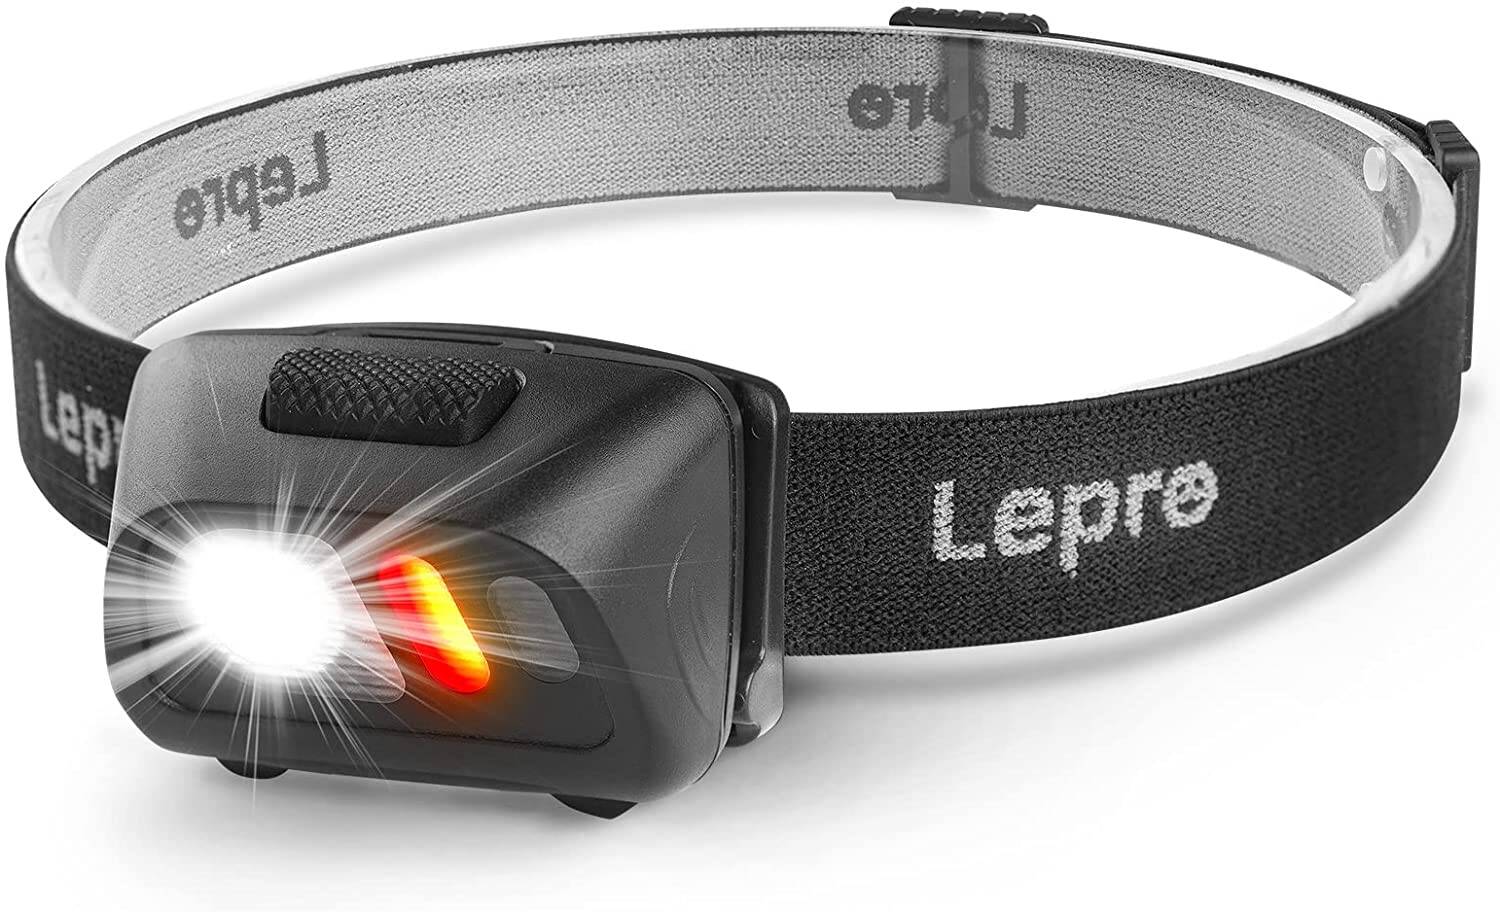 Lepro Head Torch, 700L Super Bright LED Headlamp with Lighting Modes,  Waterproof, 3A Battery Powered, Lightweight Headlight for Cycling Running  Camping for Kids Adults